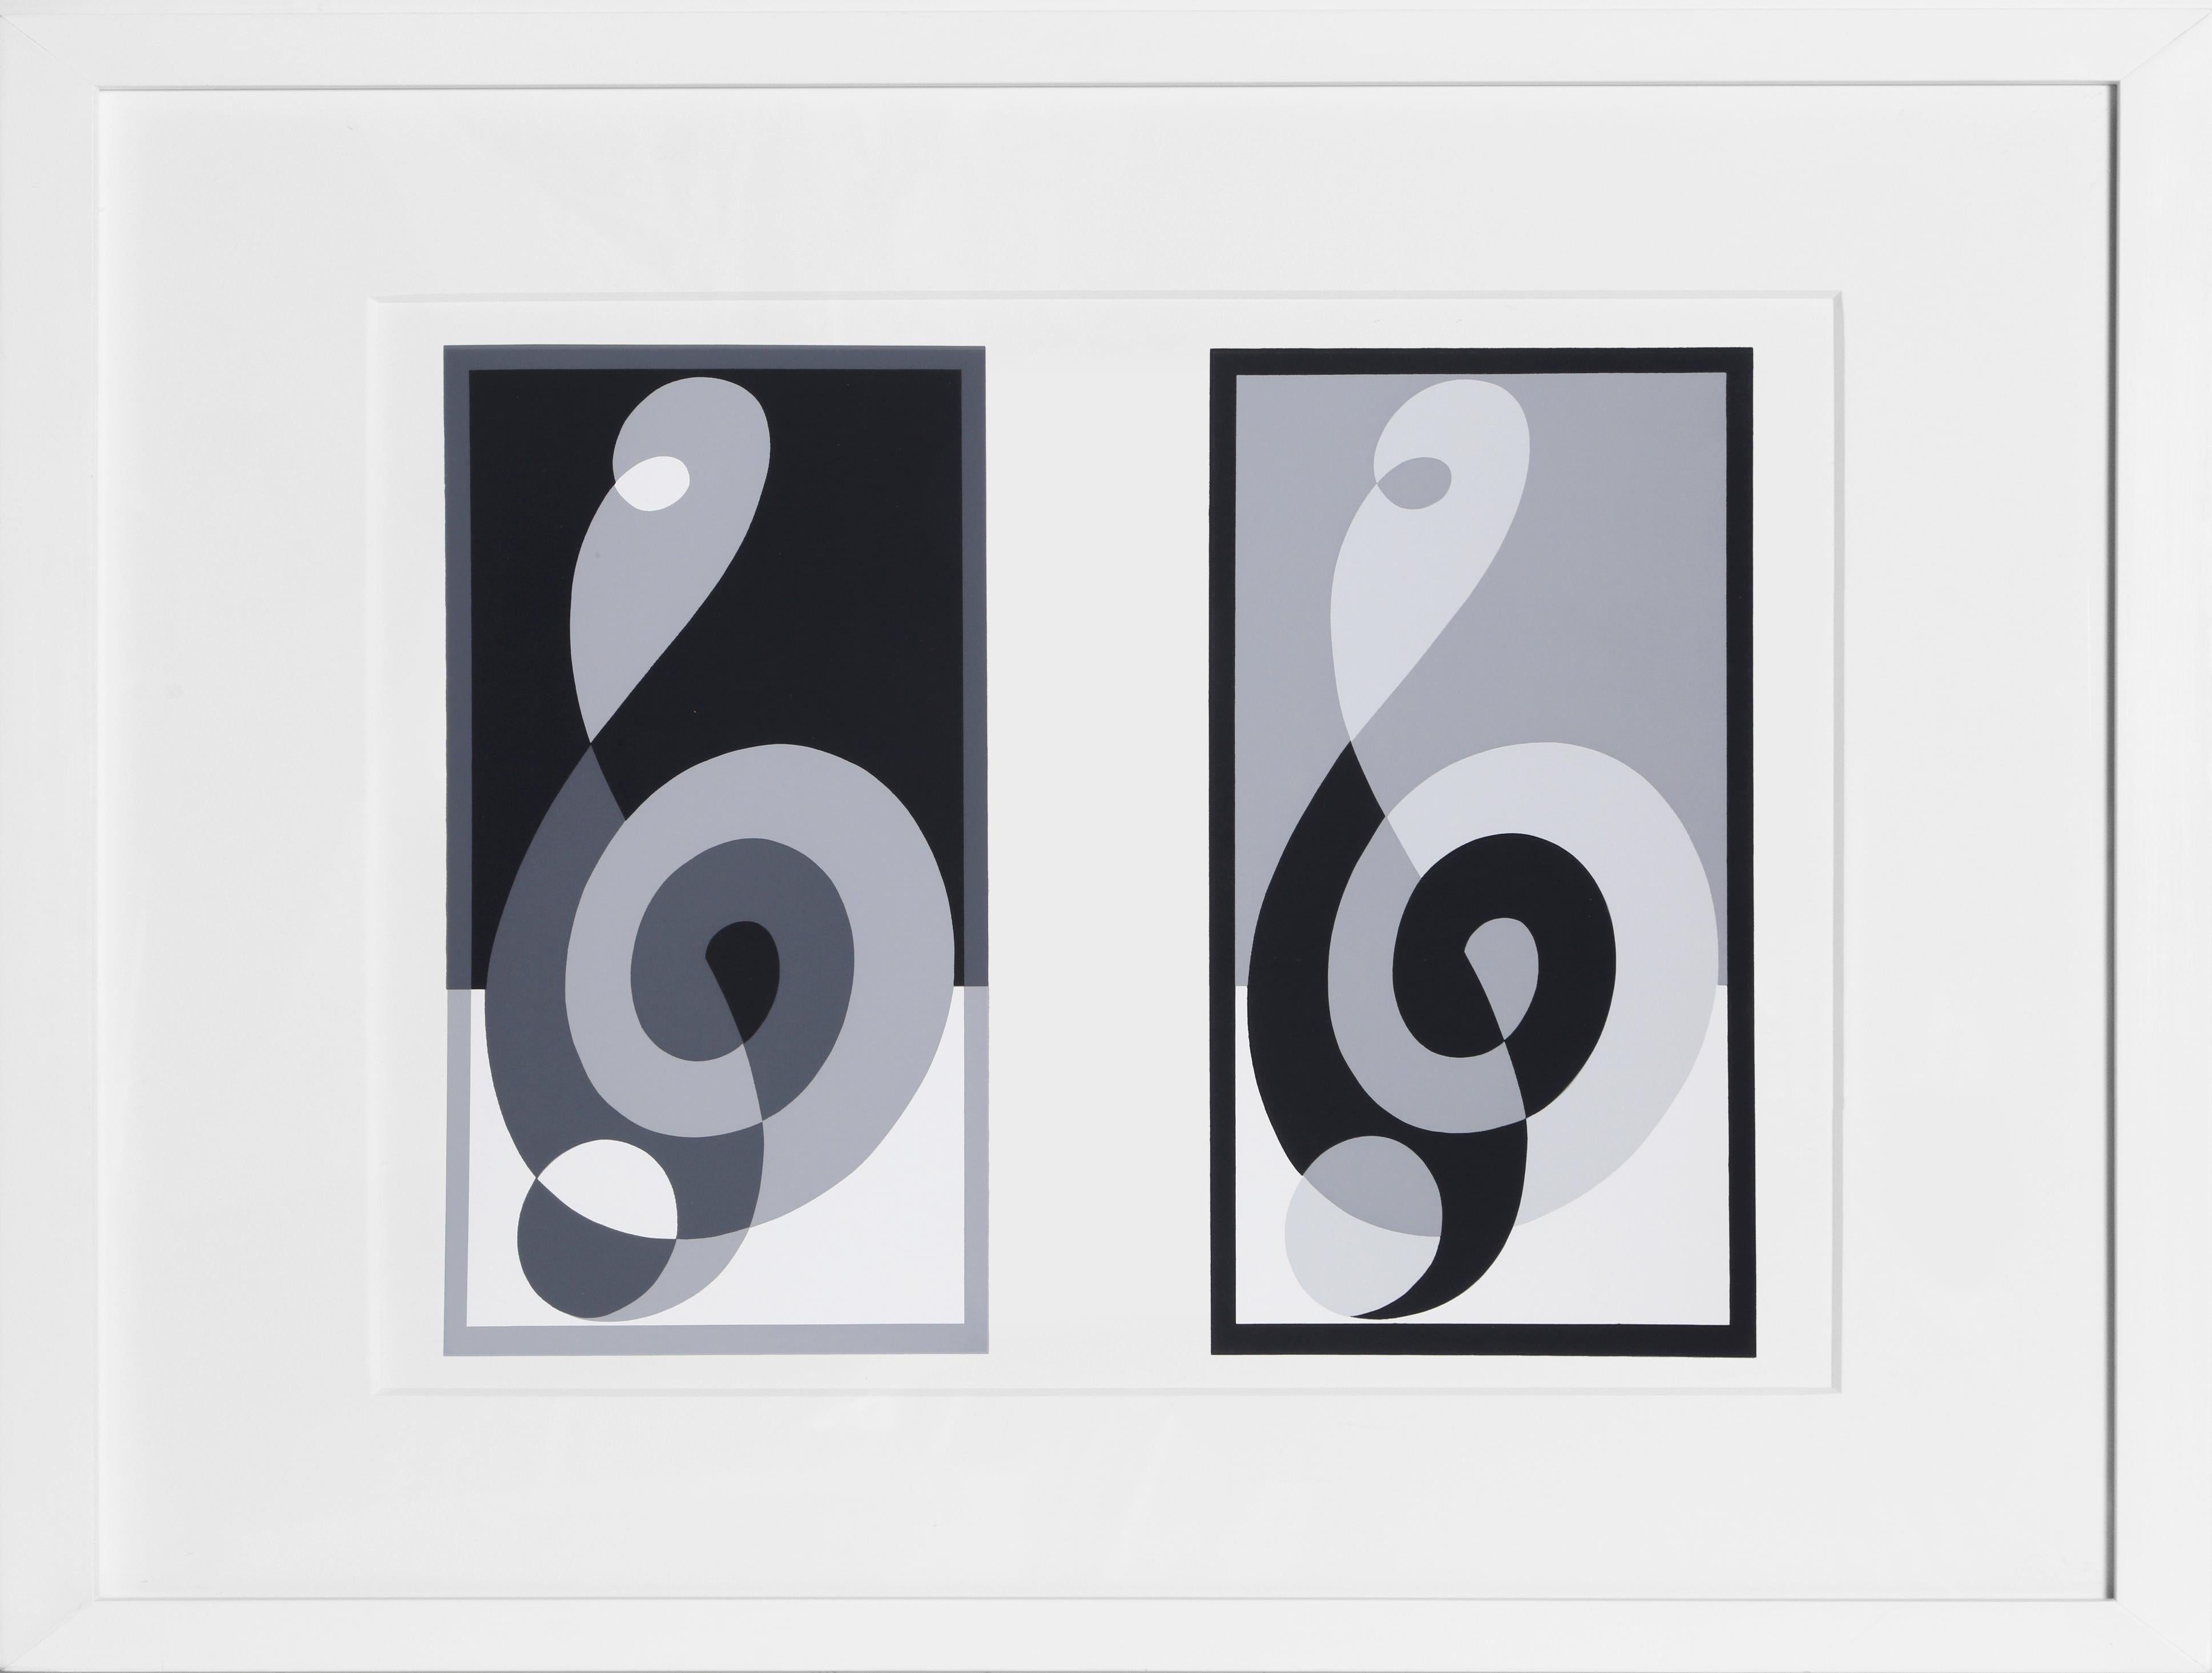 Josef Albers Abstract Print - G-Clef Variant - P1, F16, I2